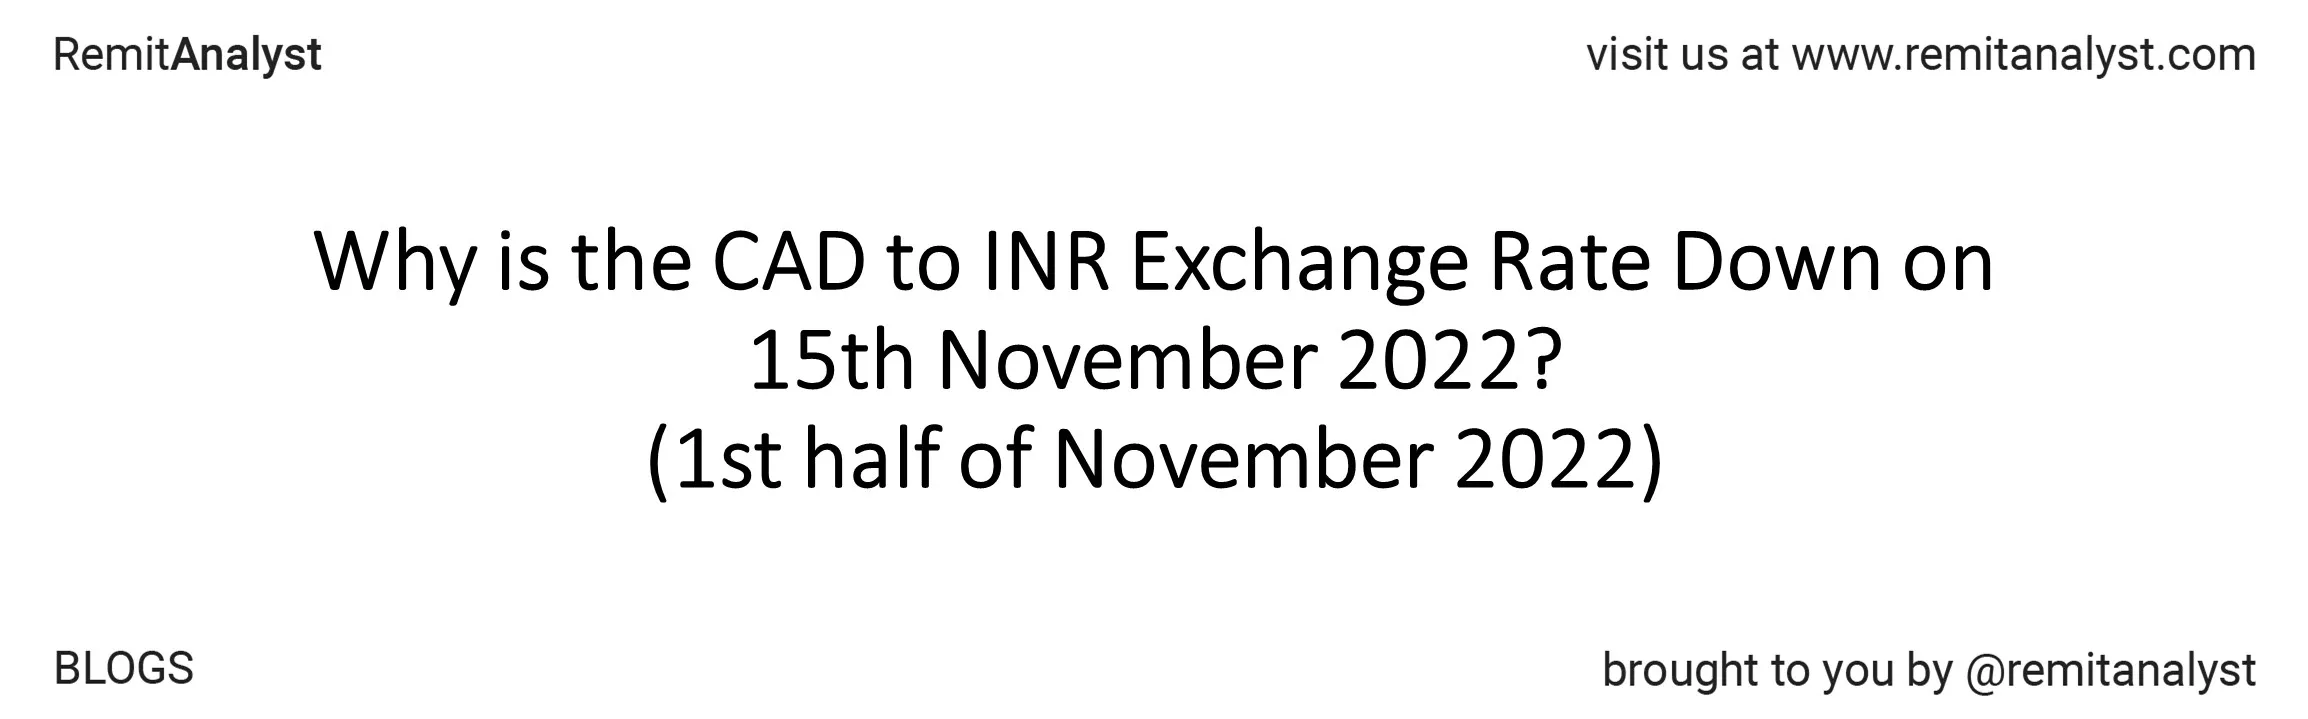 cad-to-inr-exchange-rate-from-1-nov-2022-to-15-nov-2022-title